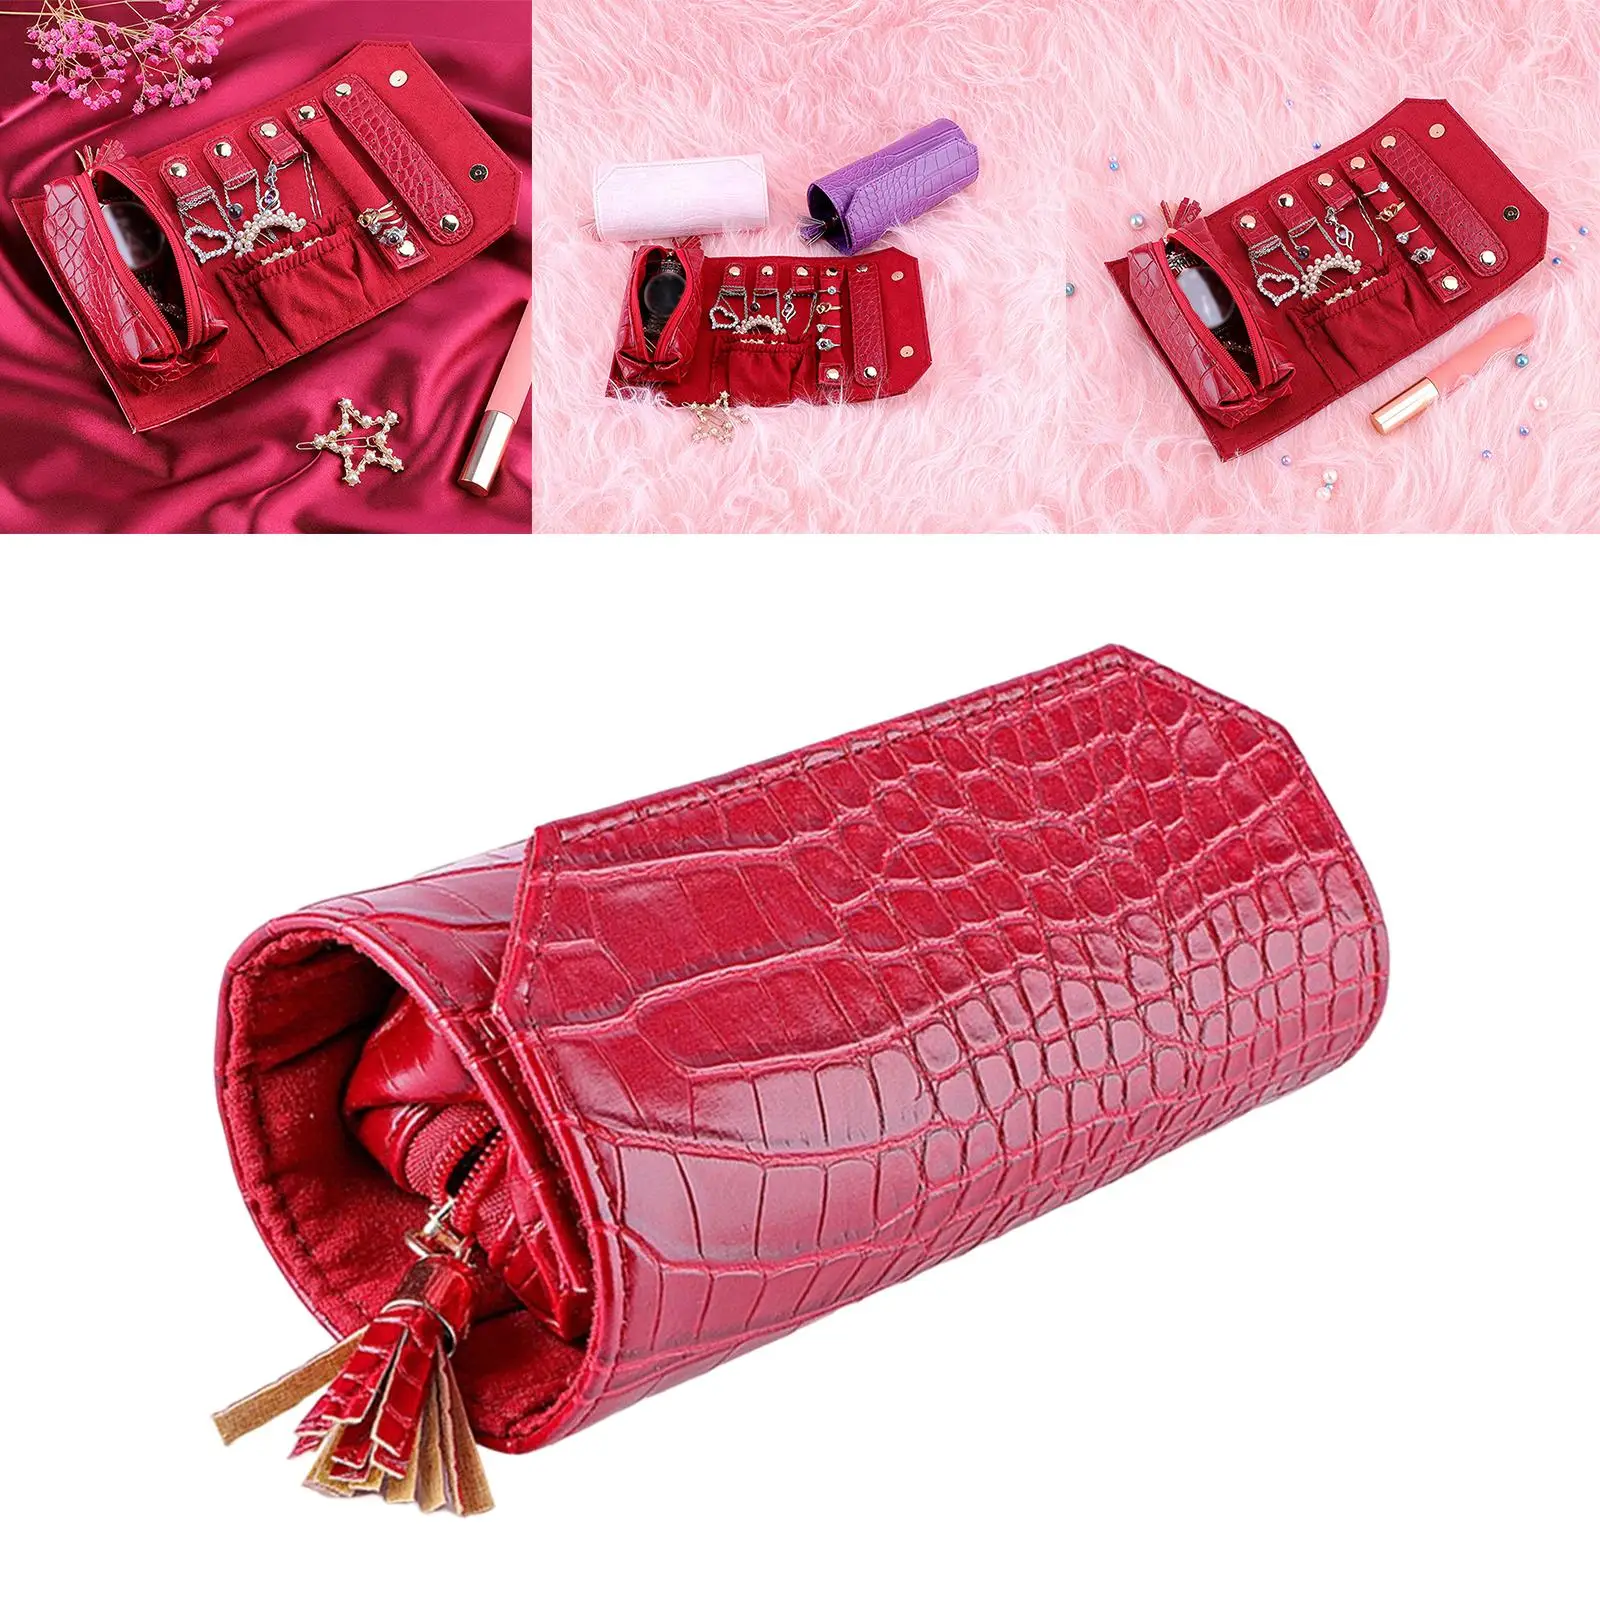 Travel Jewelry Roll Storage Organizer Gifts for Daughters, Girlfriends Detachable